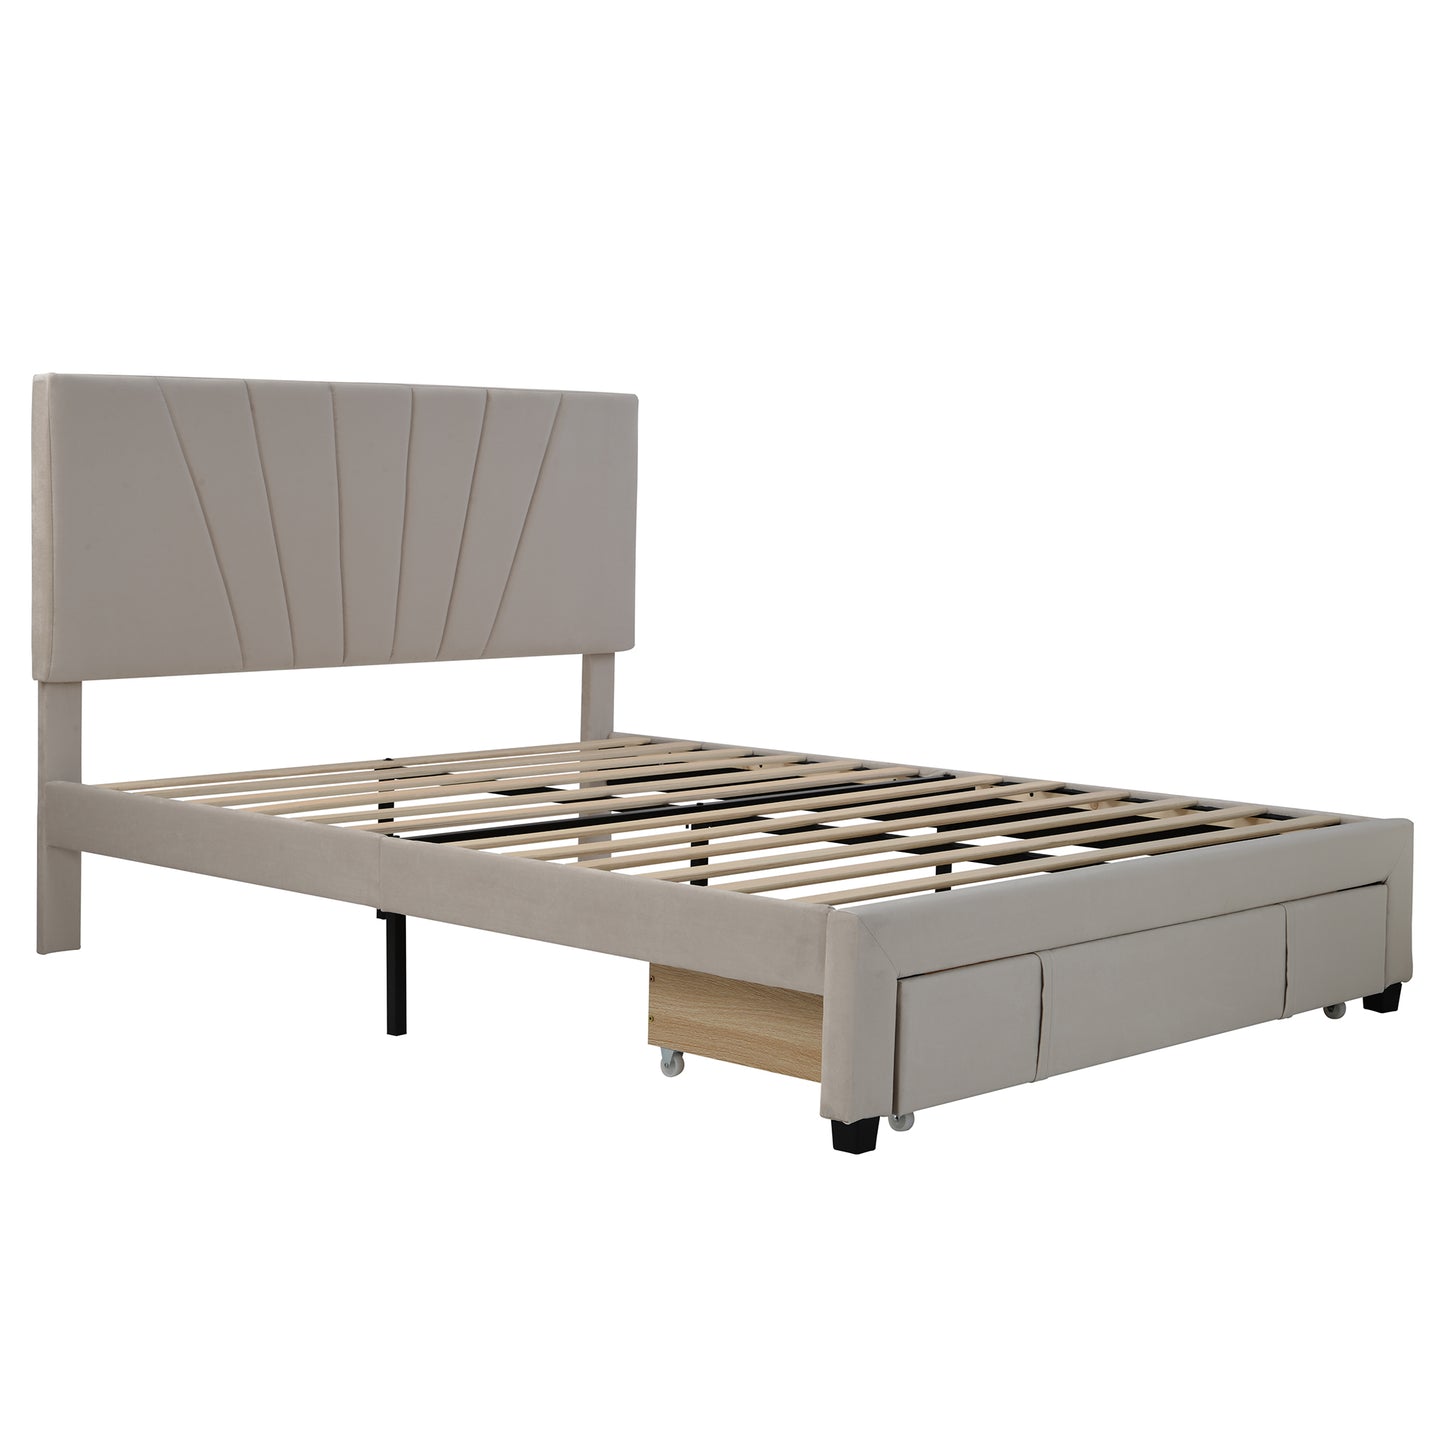 SYNGAR Upholstered Queen Platform Bed Frame with Storage Drawers, Queen Size Storage Bed with Velvet Headboard, Mattress Foundation with Strong Slats, No Box Spring Needed, Noise Free, Beige